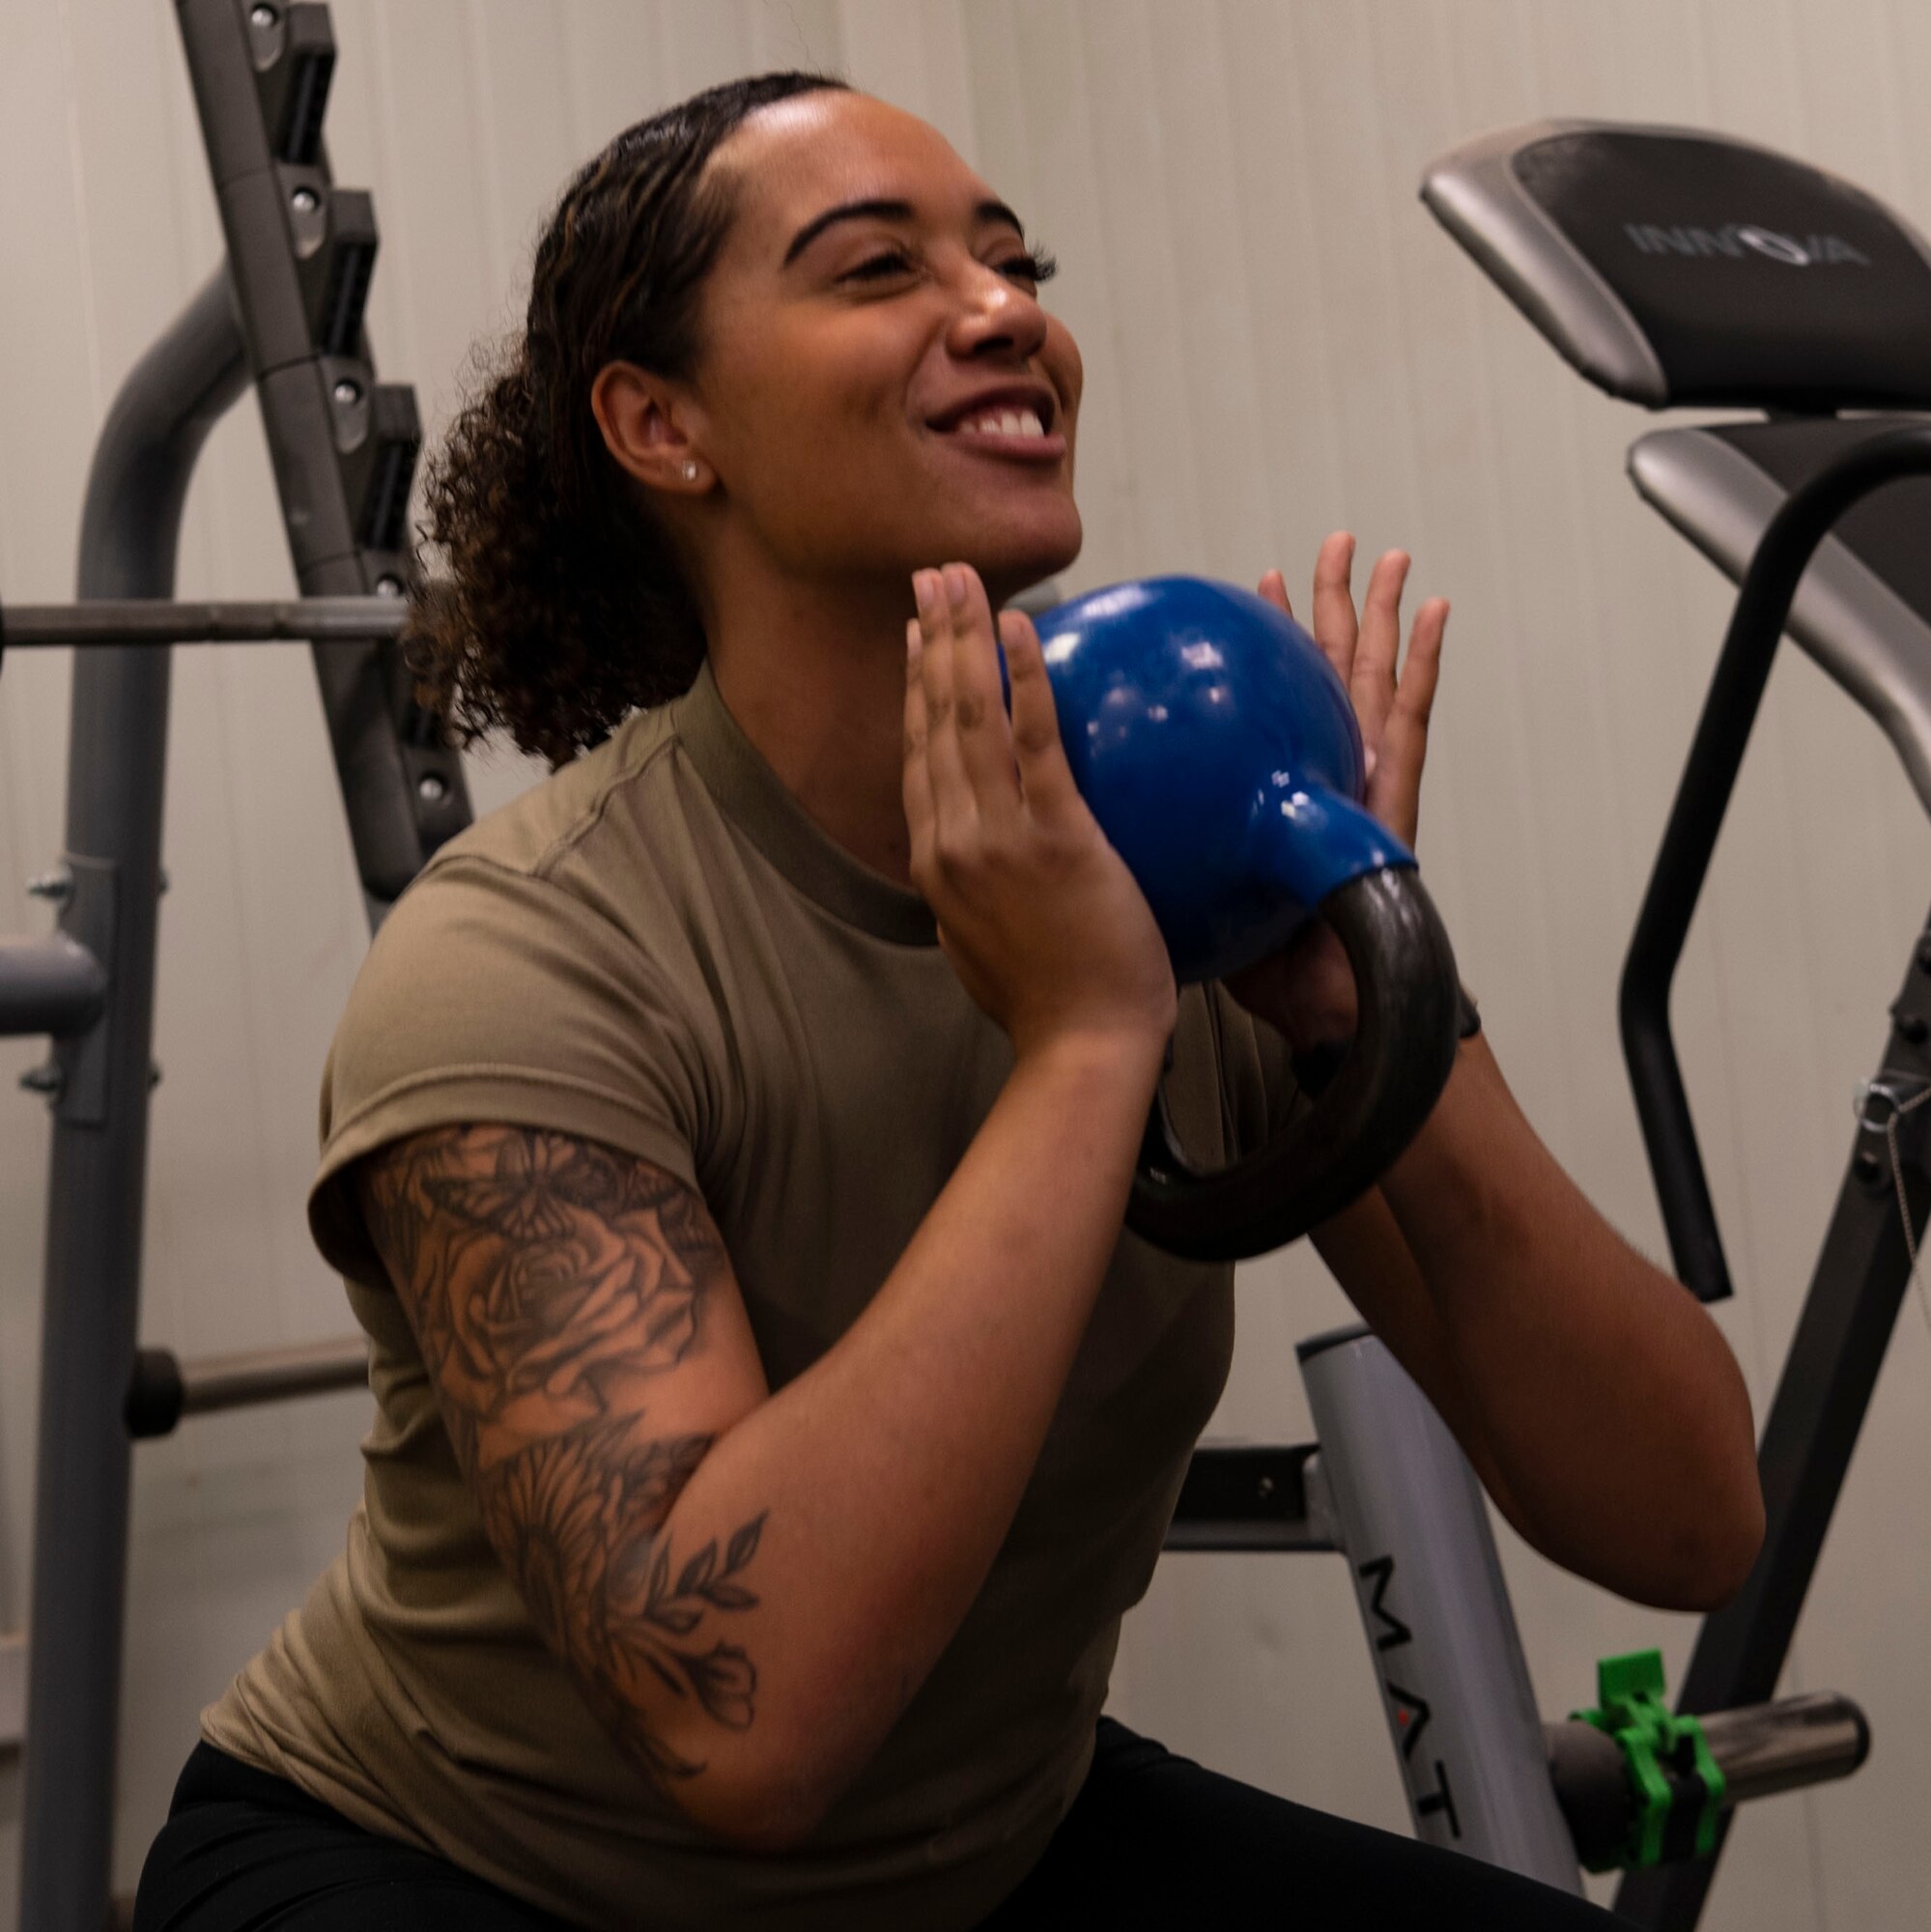 Senior Airman Tyra Hazelhoff Mitchell, 332d Expeditionary Medical Squadron, Physical Therapist Technician, explains rehabilitation and exercise treatment for injured Airmen.